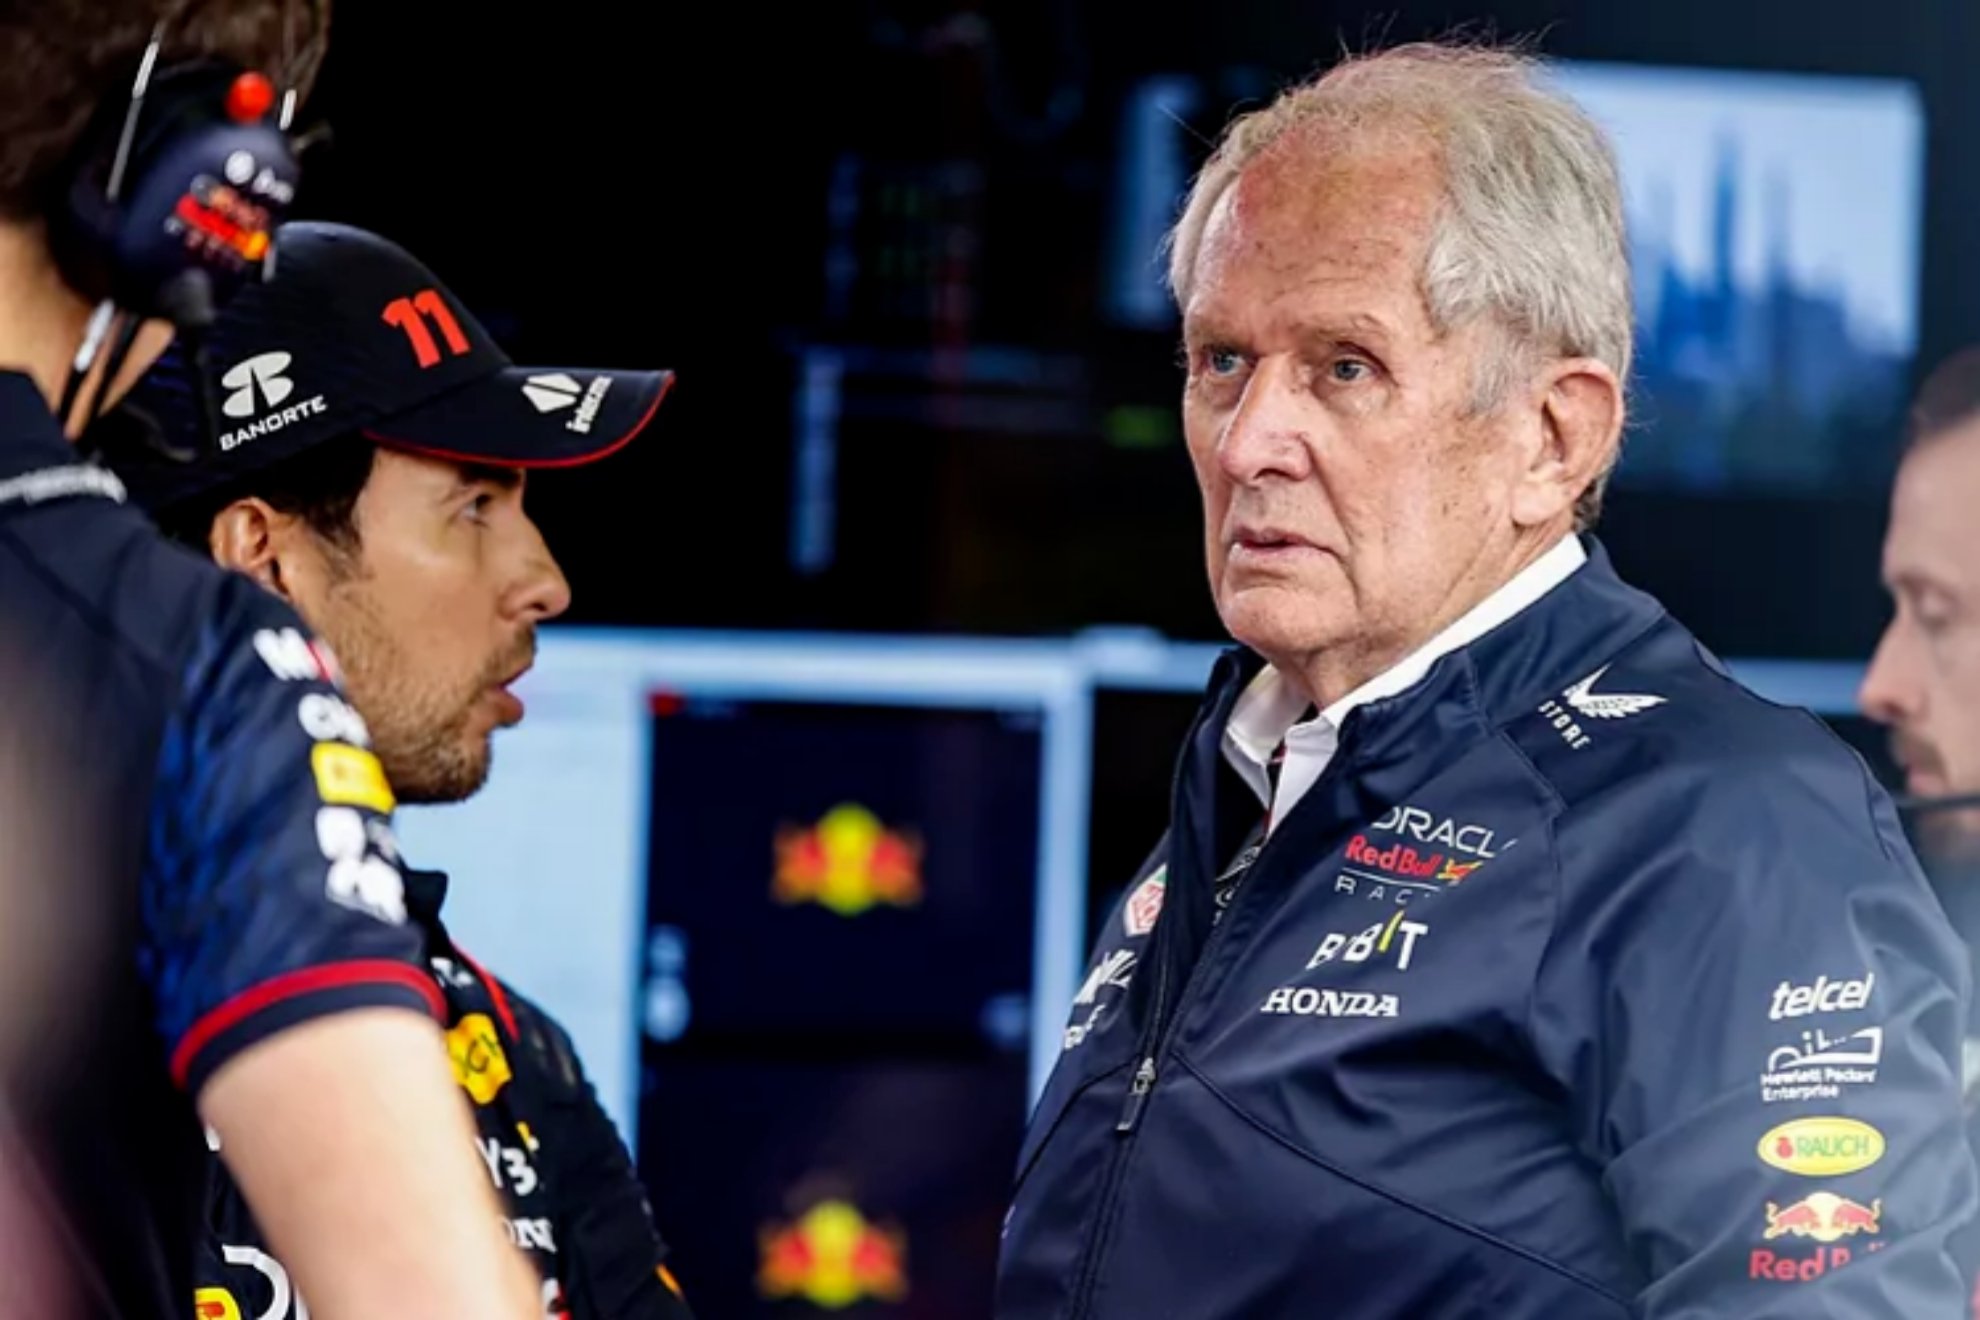 Marko on Checo's race: "He crashed into the wall at the entrance to the pits. I think he got the five-second penalty there too. "He was lucky again that the race was stopped, because otherwise he would not have been able to save this fourth place."